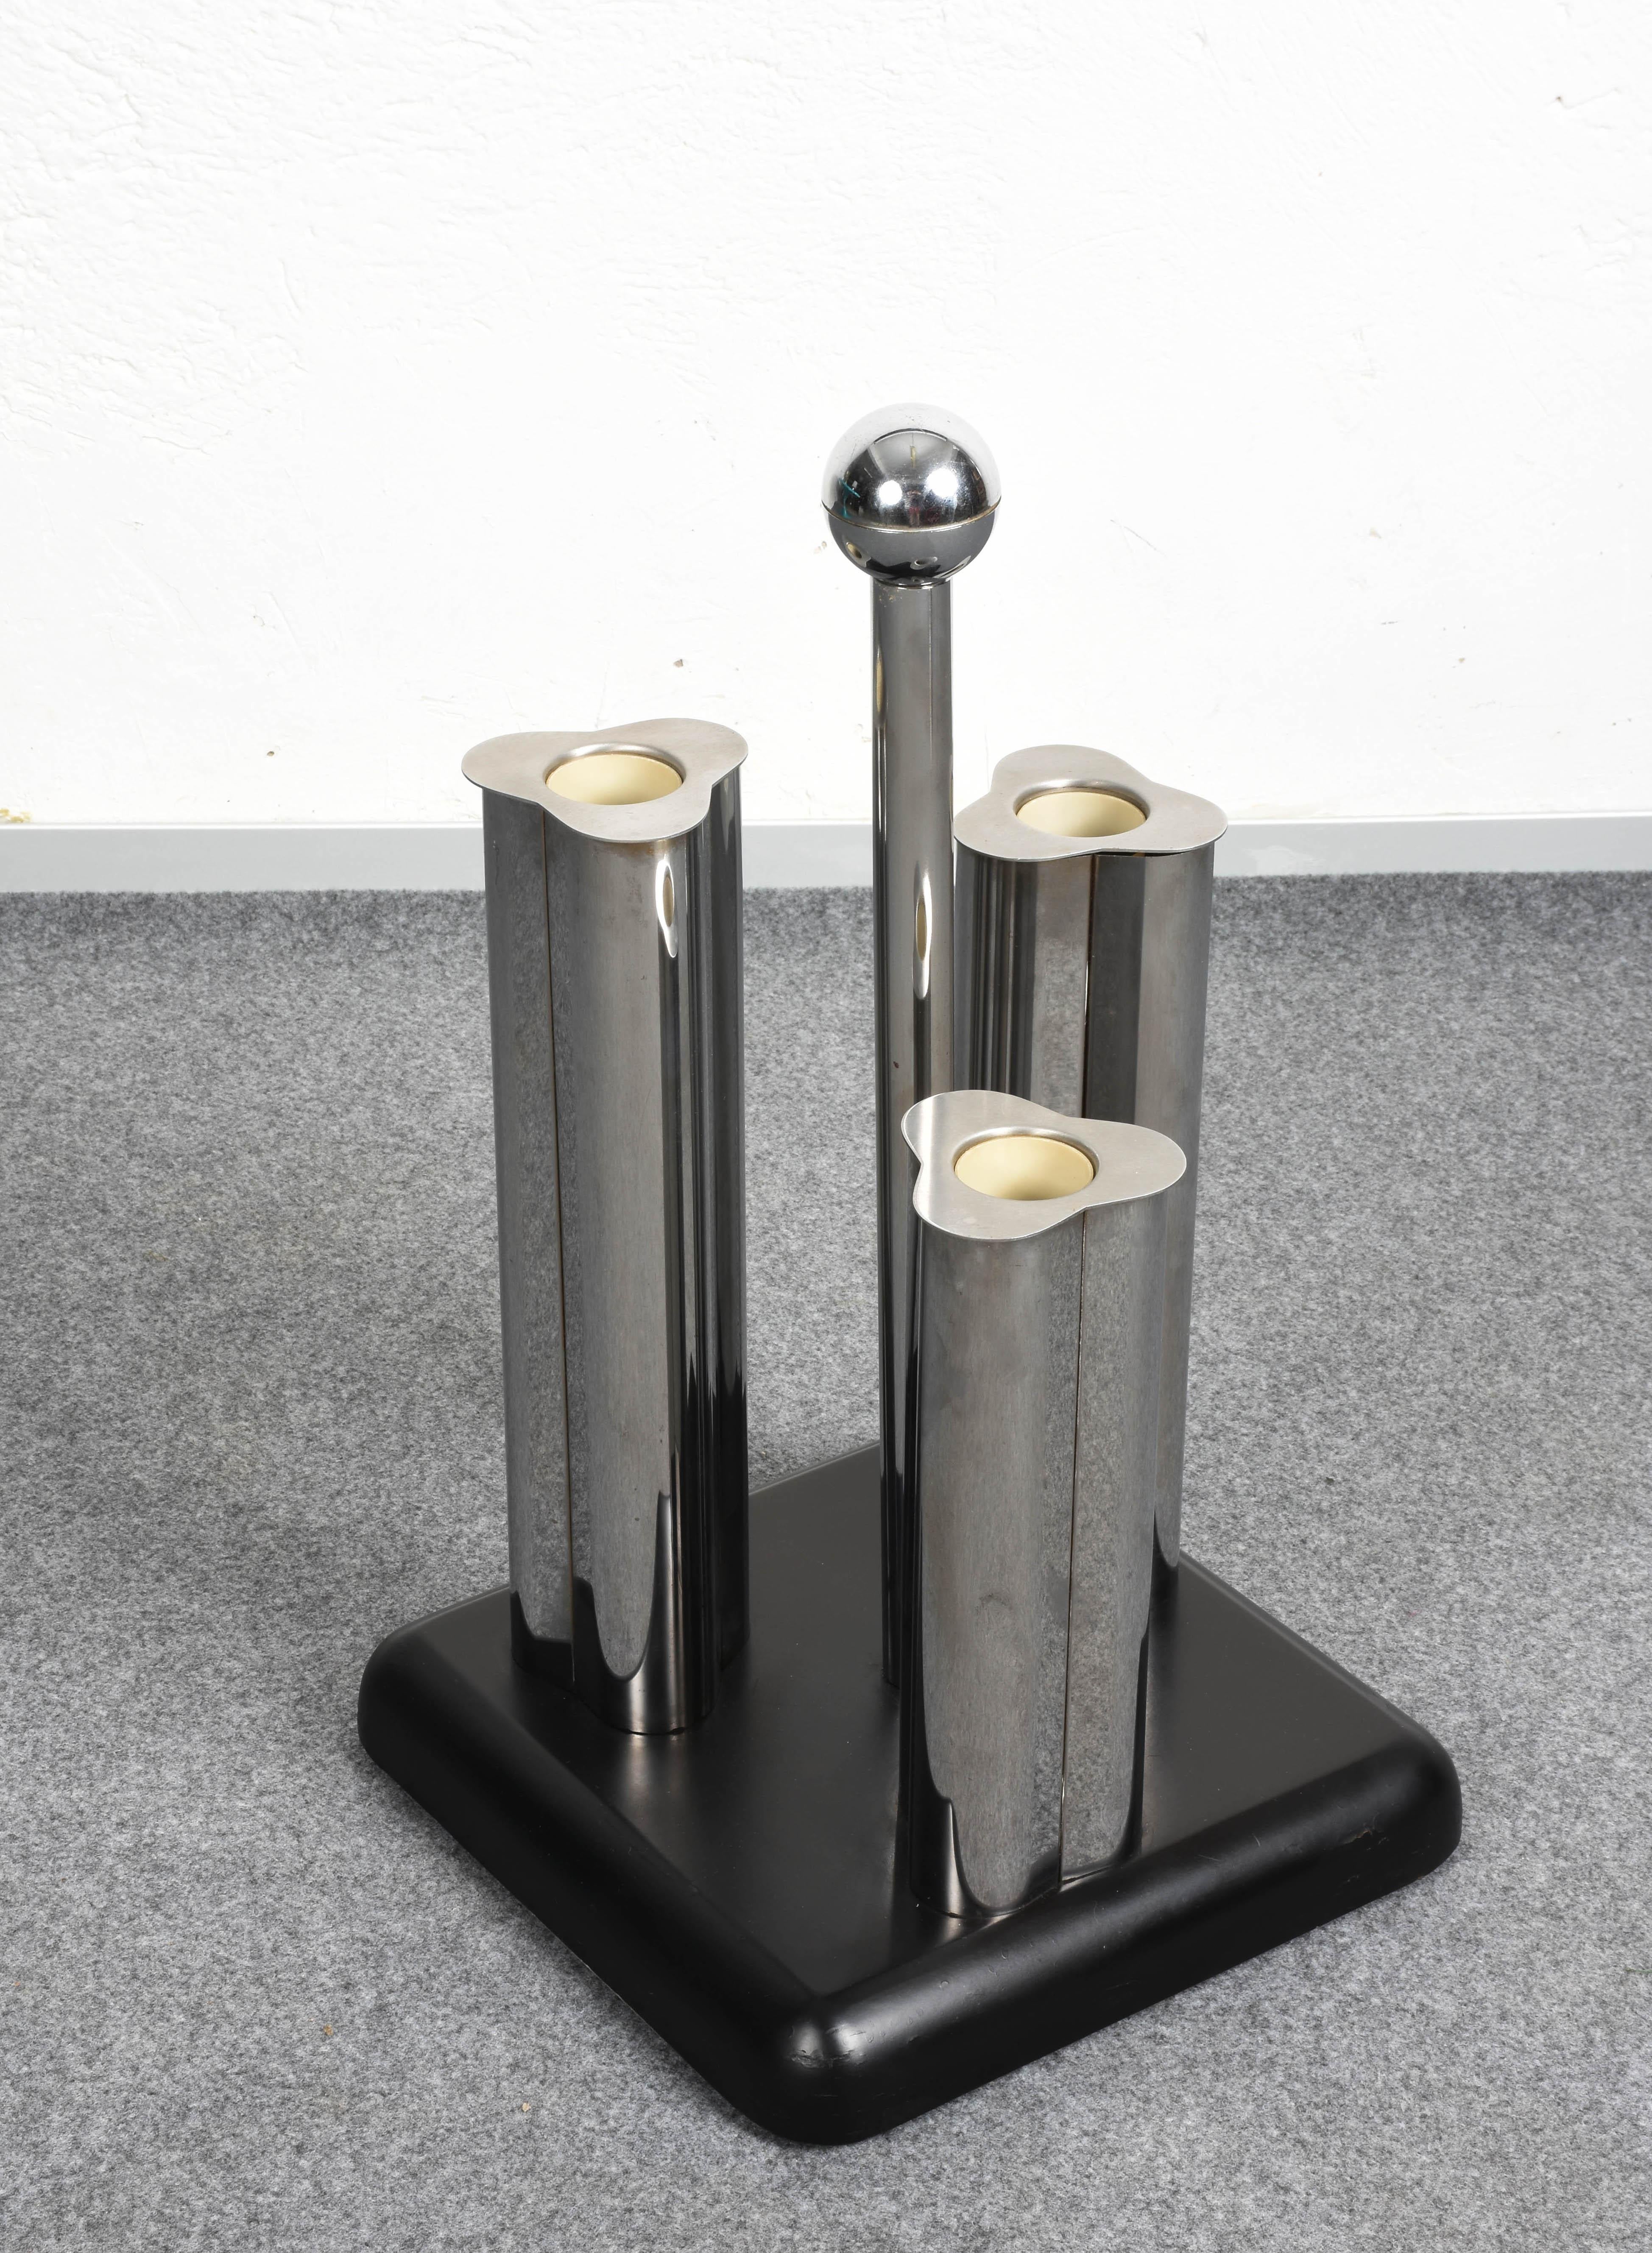 Umbrella Stand Black, Italian, Lacquered Wood and Metal, Italy, 1970s Vintage For Sale 1